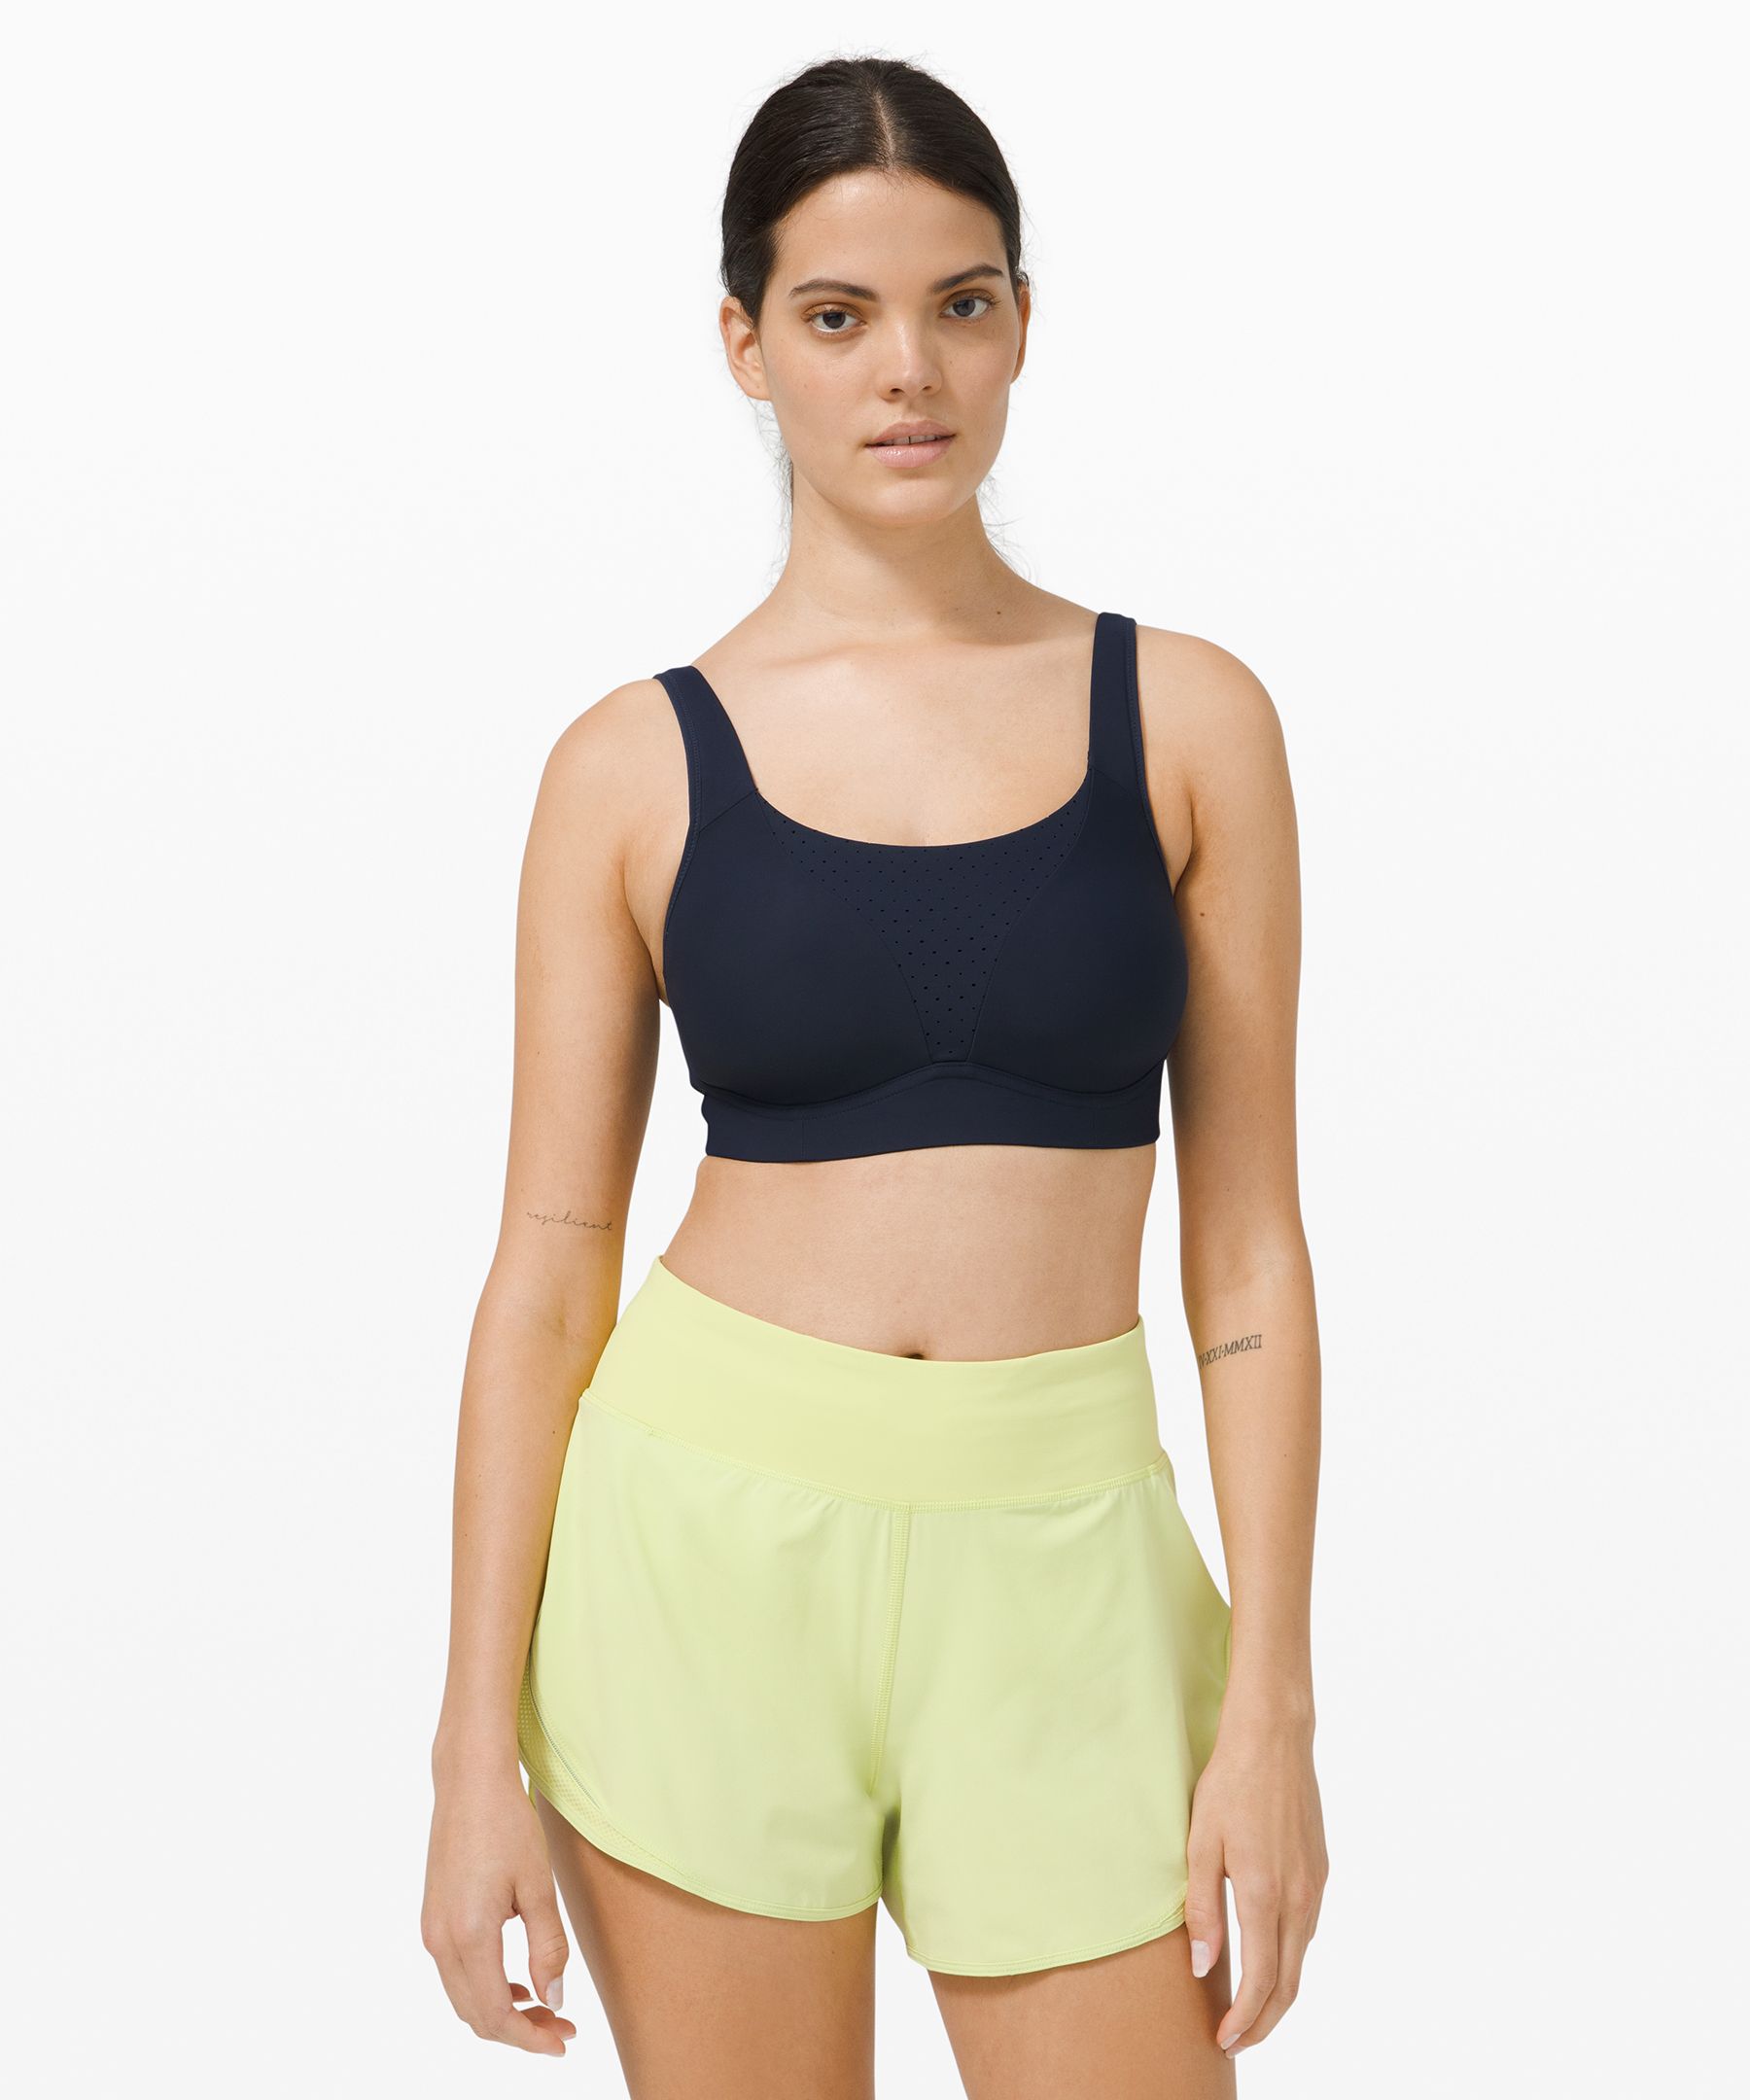 Signature Bralette Top Medium Support with Supportive Underband